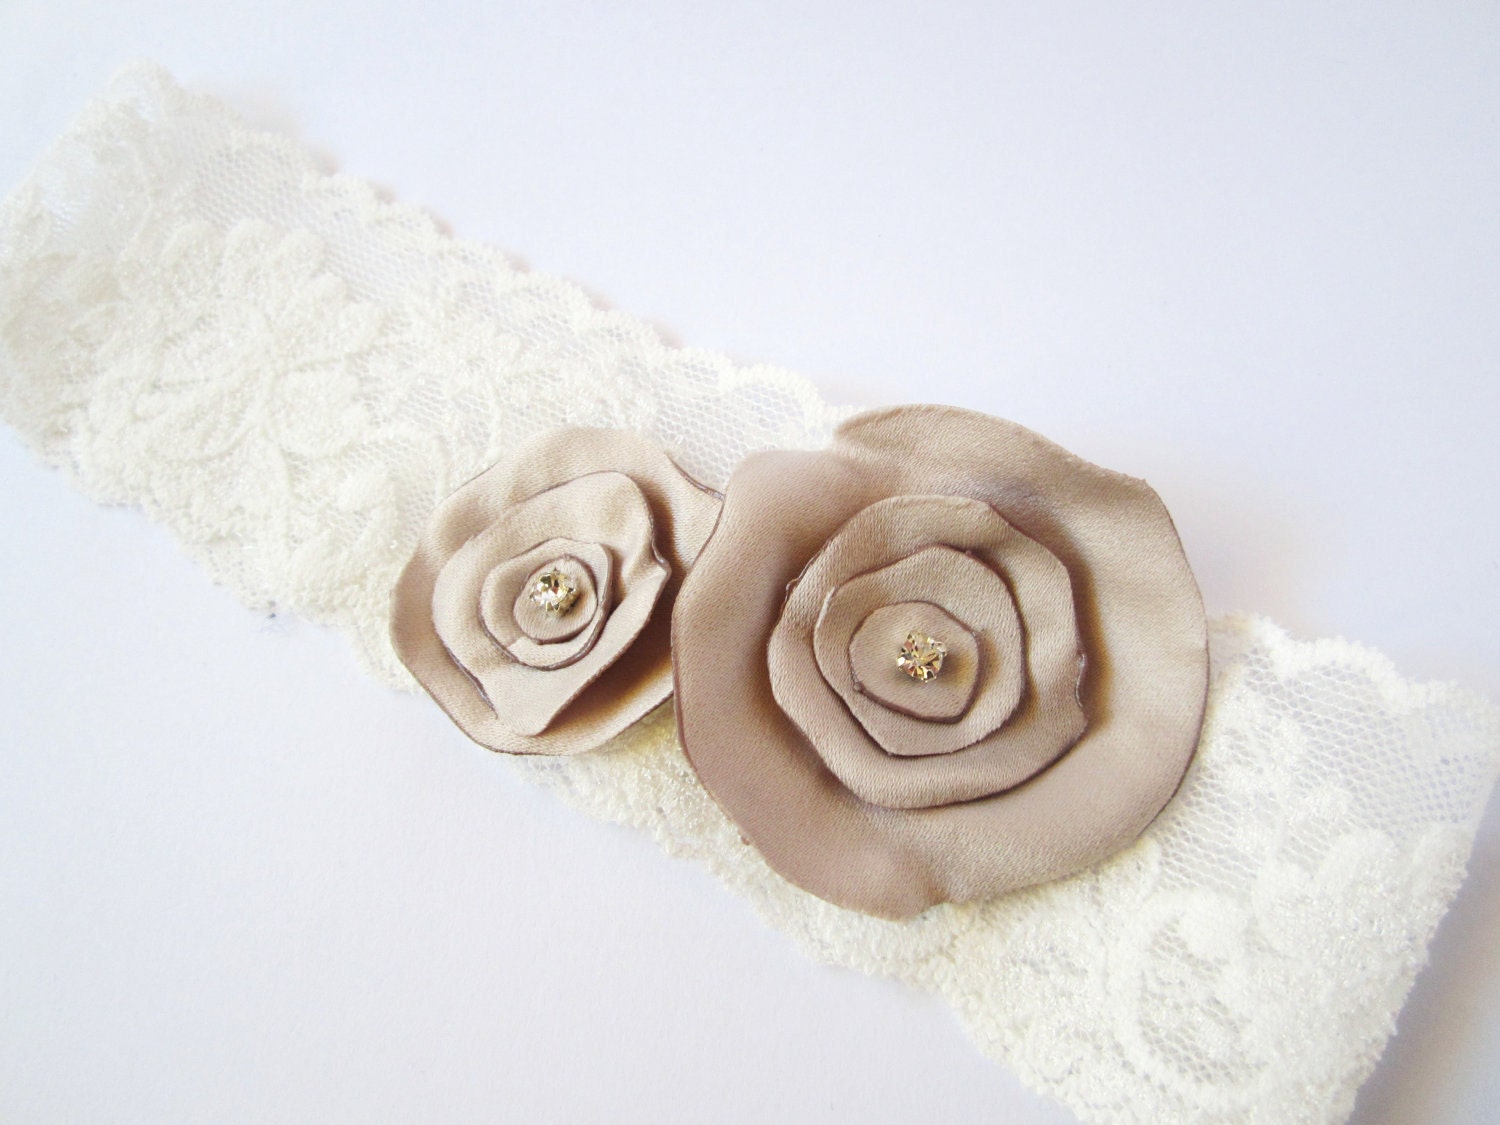 Garter Set in Ivory Lace with Satin Flowers and Swarovski Crystals - Shown : Champagne